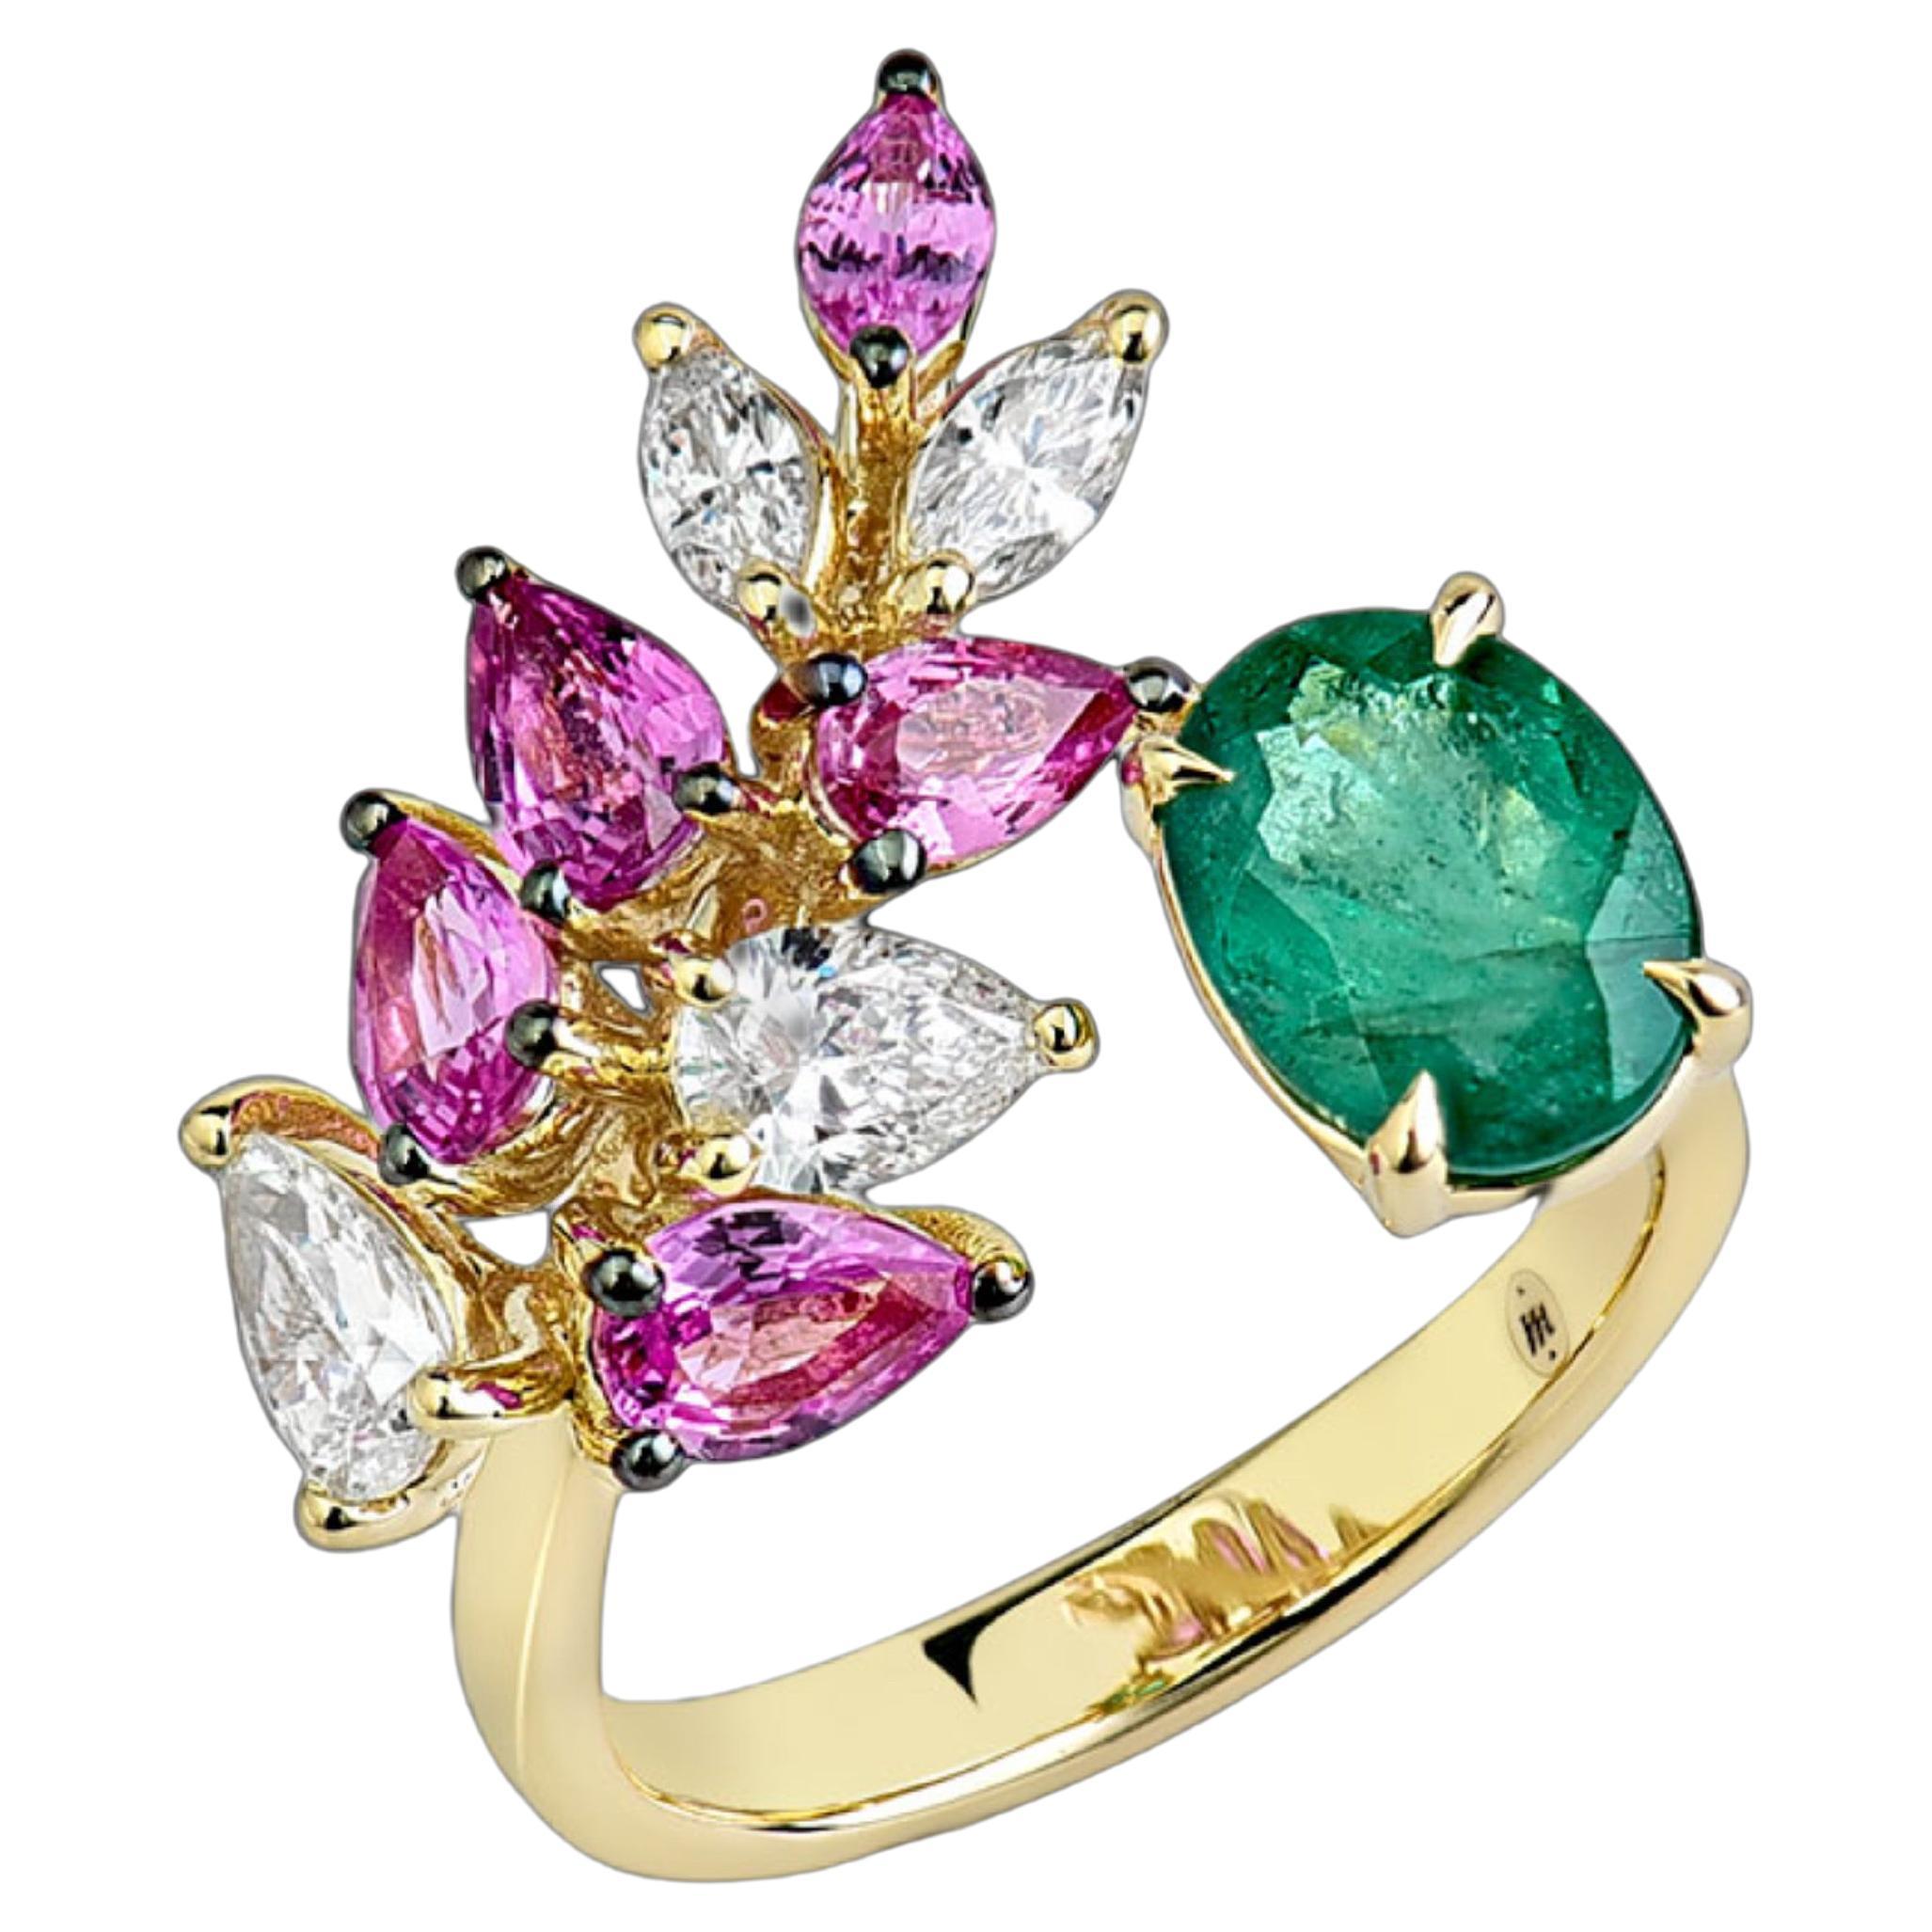 For Sale:  14K Yellow Gold Oval Cut Emerald, w/ Pear Shape Pink Sapphires and Diamond Ring